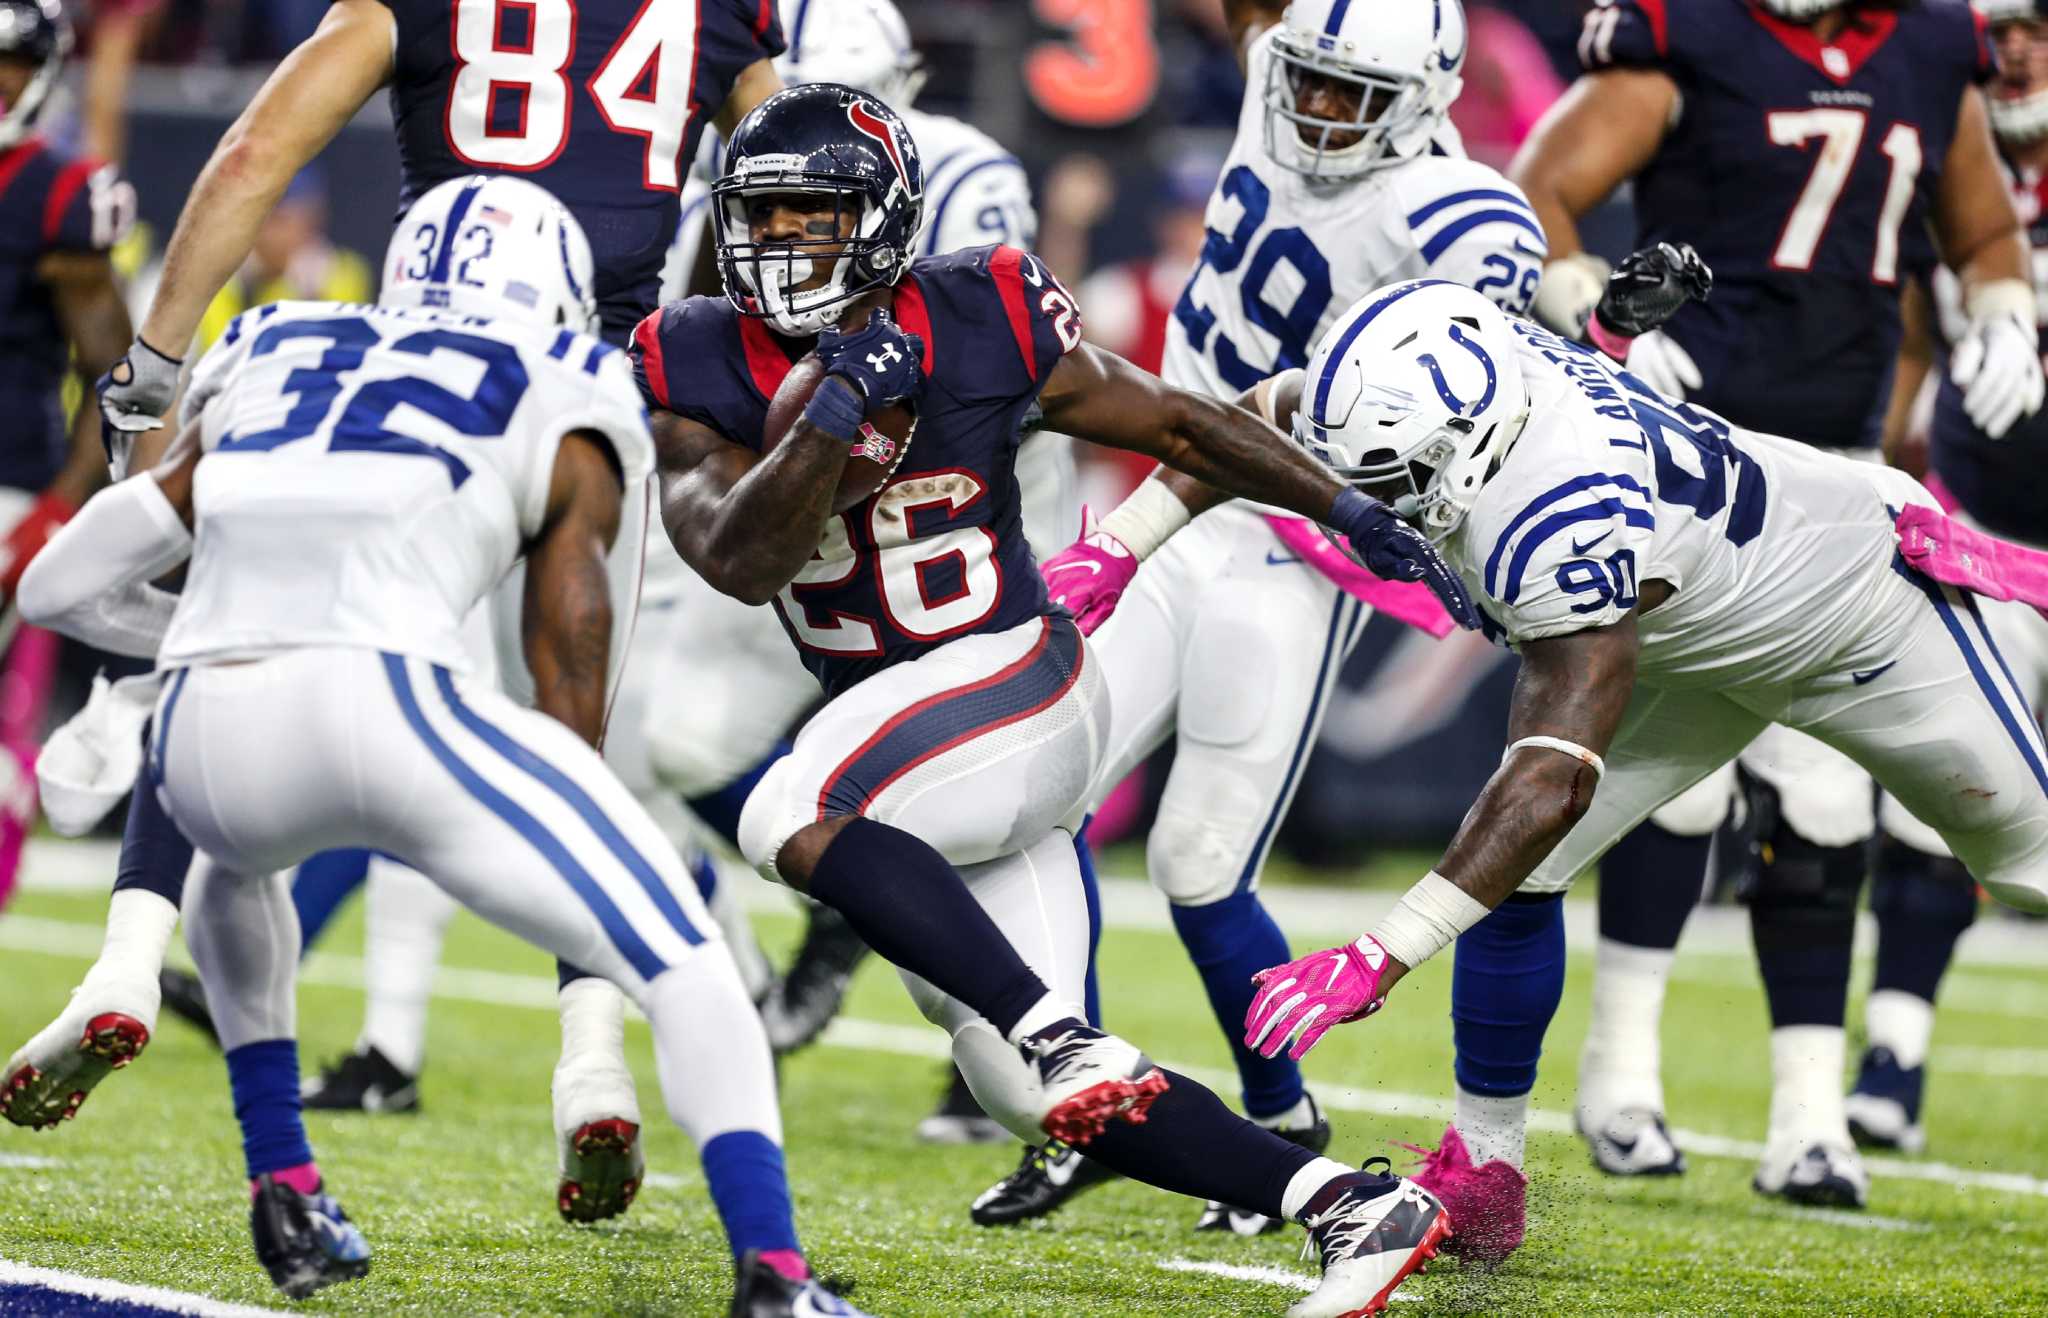 Breaking down the Texans' overtime win over the Colts by the numbers